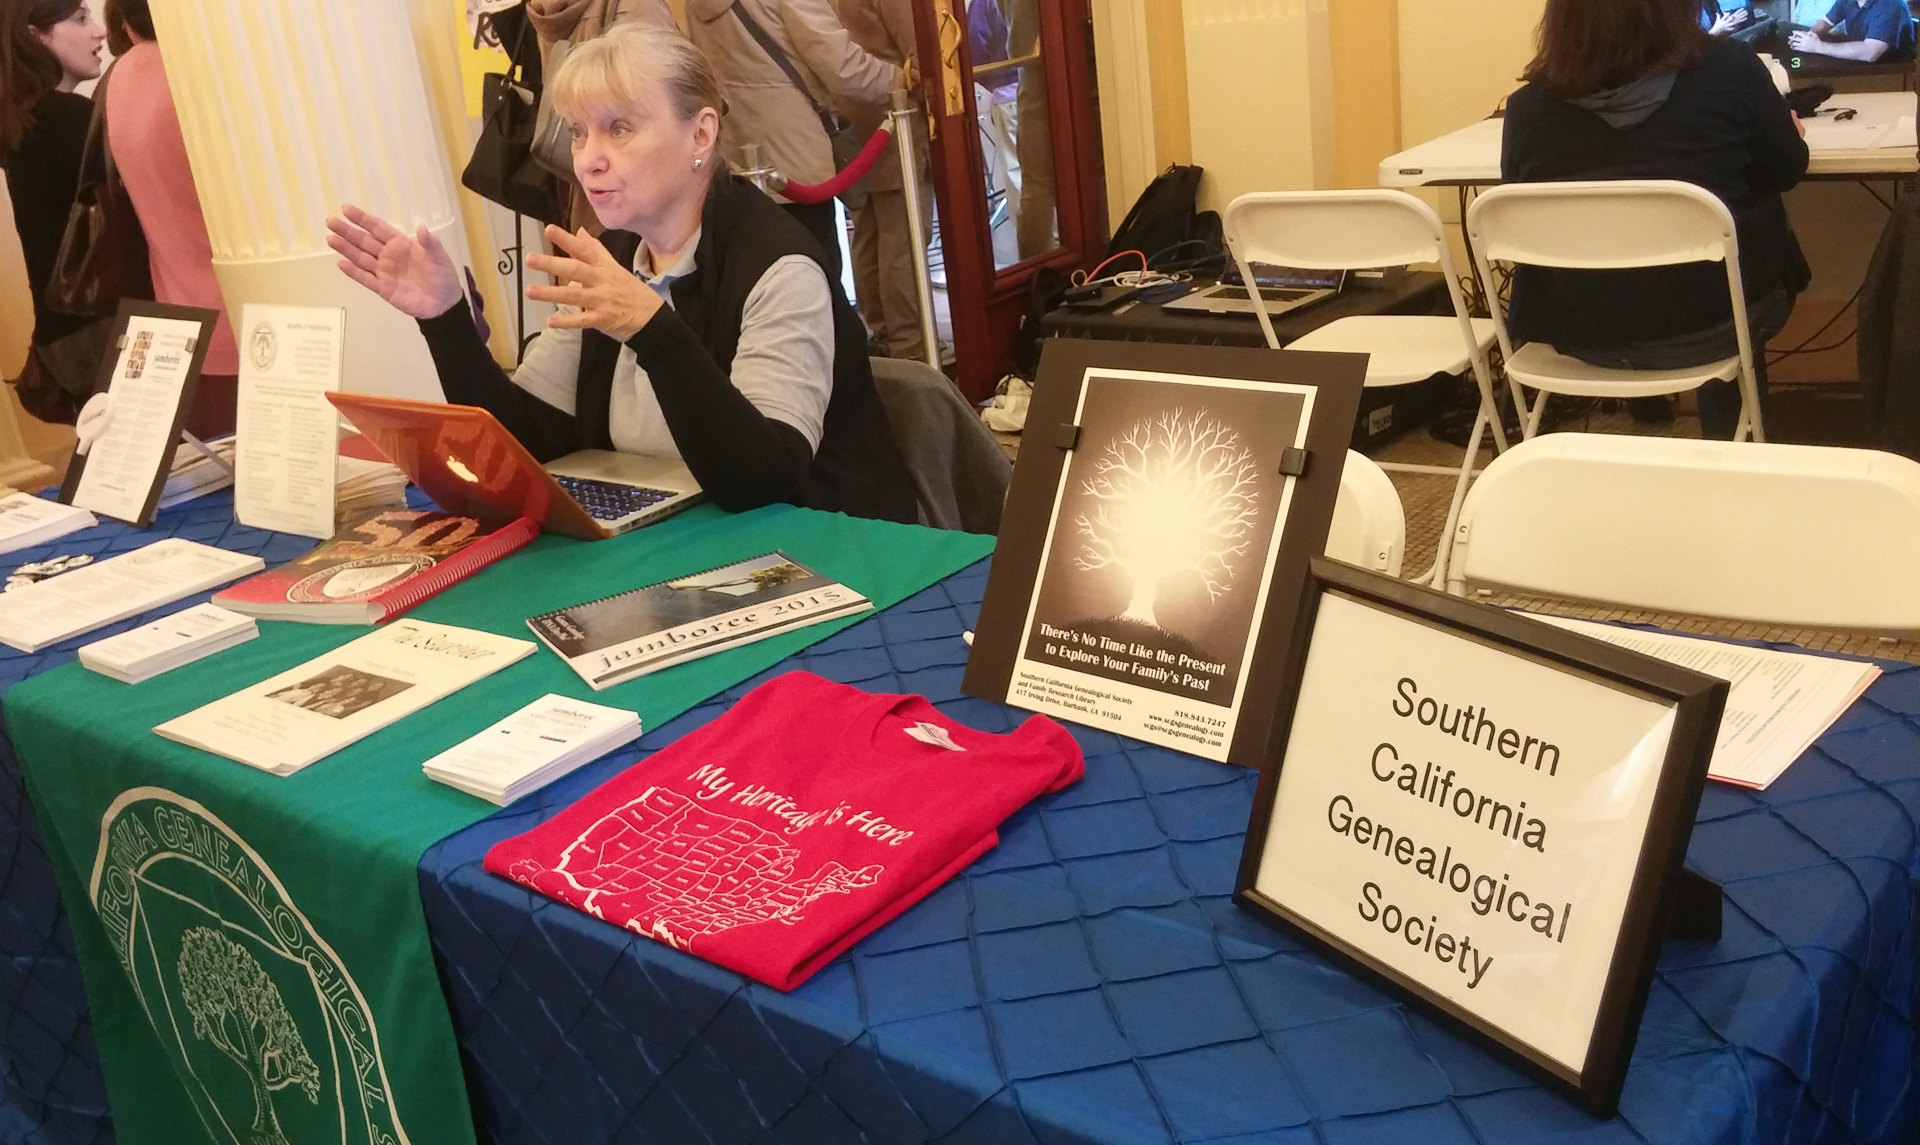 The Booth for the Southern California Genealogical Society